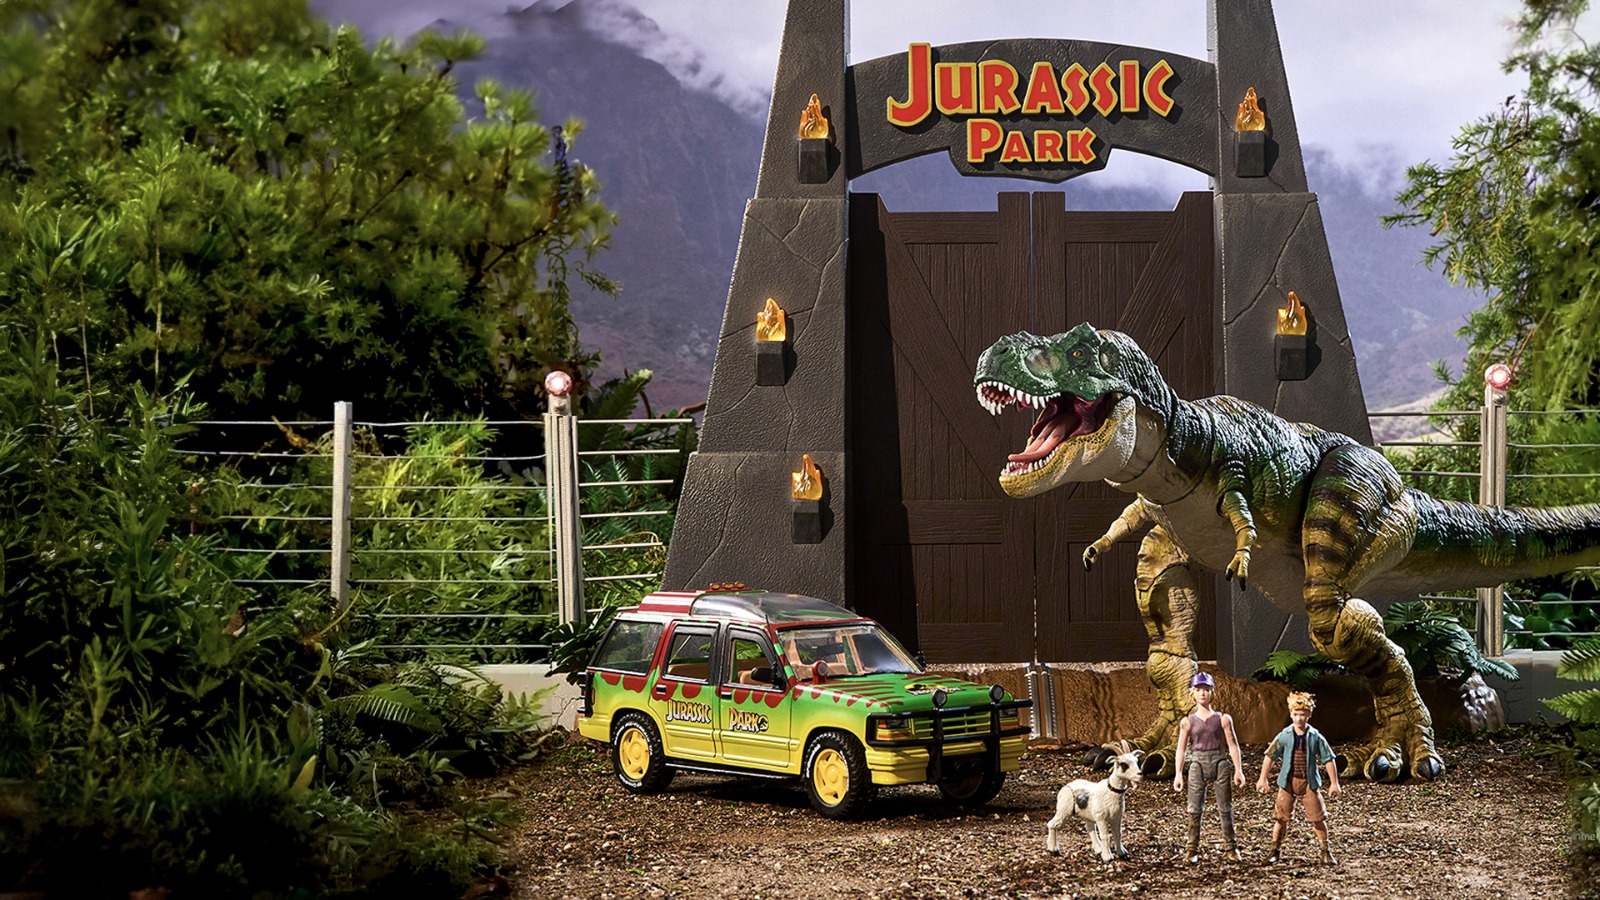 Jurassic Park Gates, ‘Buck’ T. rex and MORE Available as Mattel Creations Crowdfund Set!